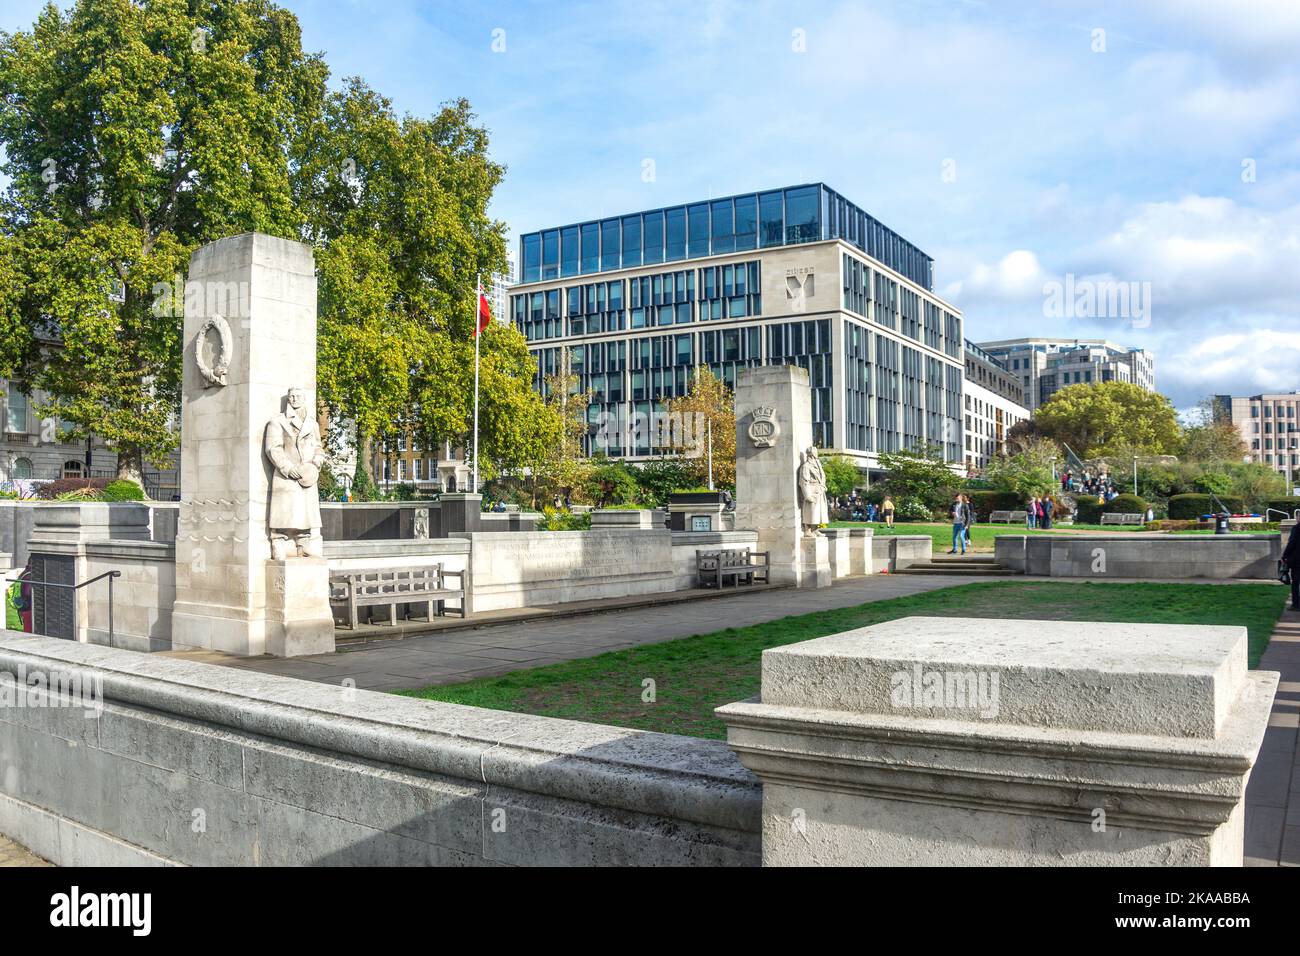 Tower Hill Memorial, Trinity Square Gardens, Tower Hill, London Borough of Tower Hamlets, Greater London, Inghilterra, Regno Unito Foto Stock